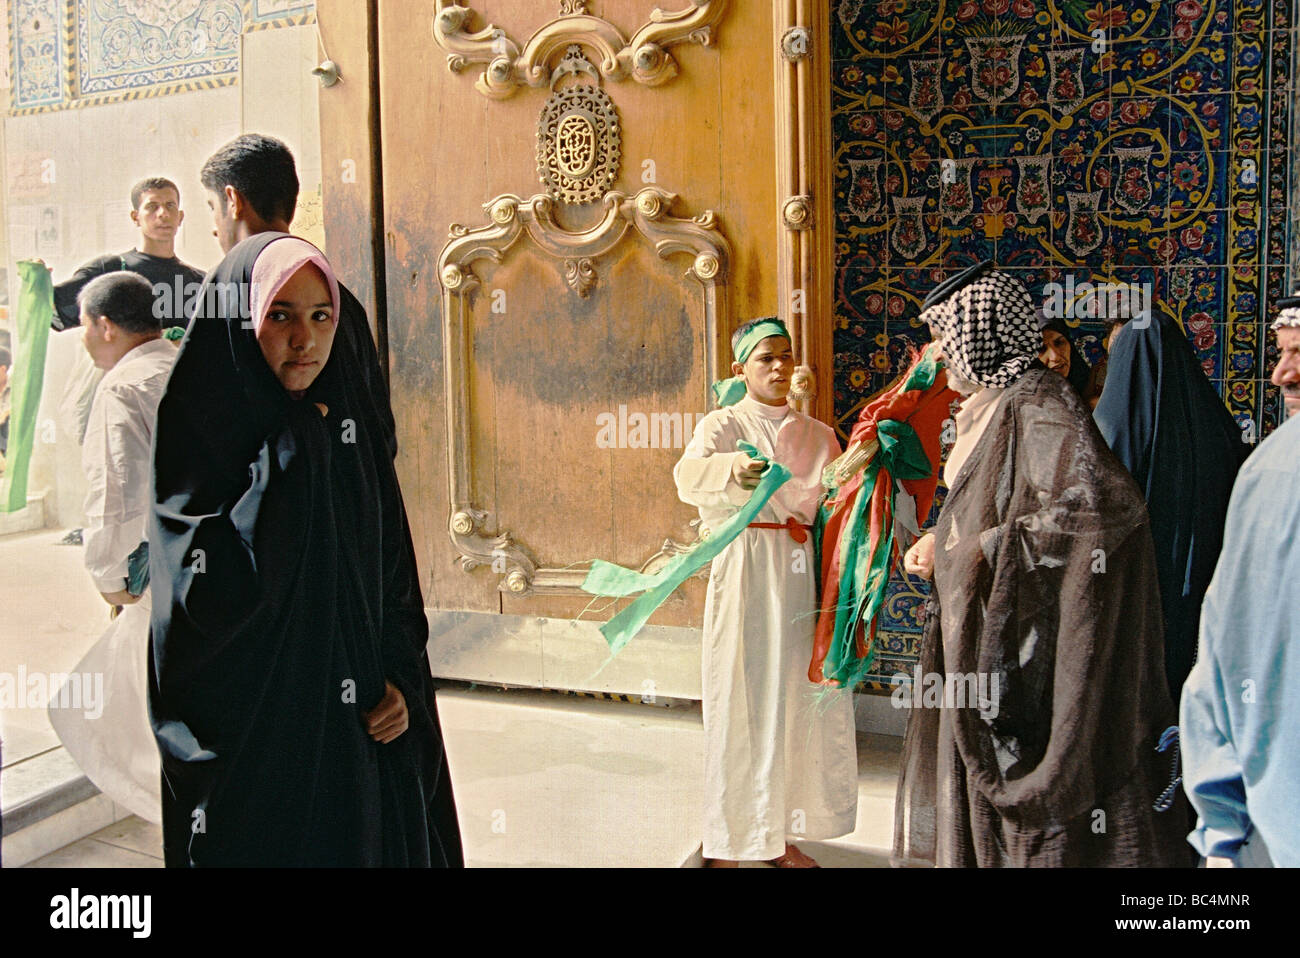 Worshippers at one of the gateways to the Imam Husayn mosque and shrine during the holy period of Ashura, in Kerbala, Iraq. Stock Photo